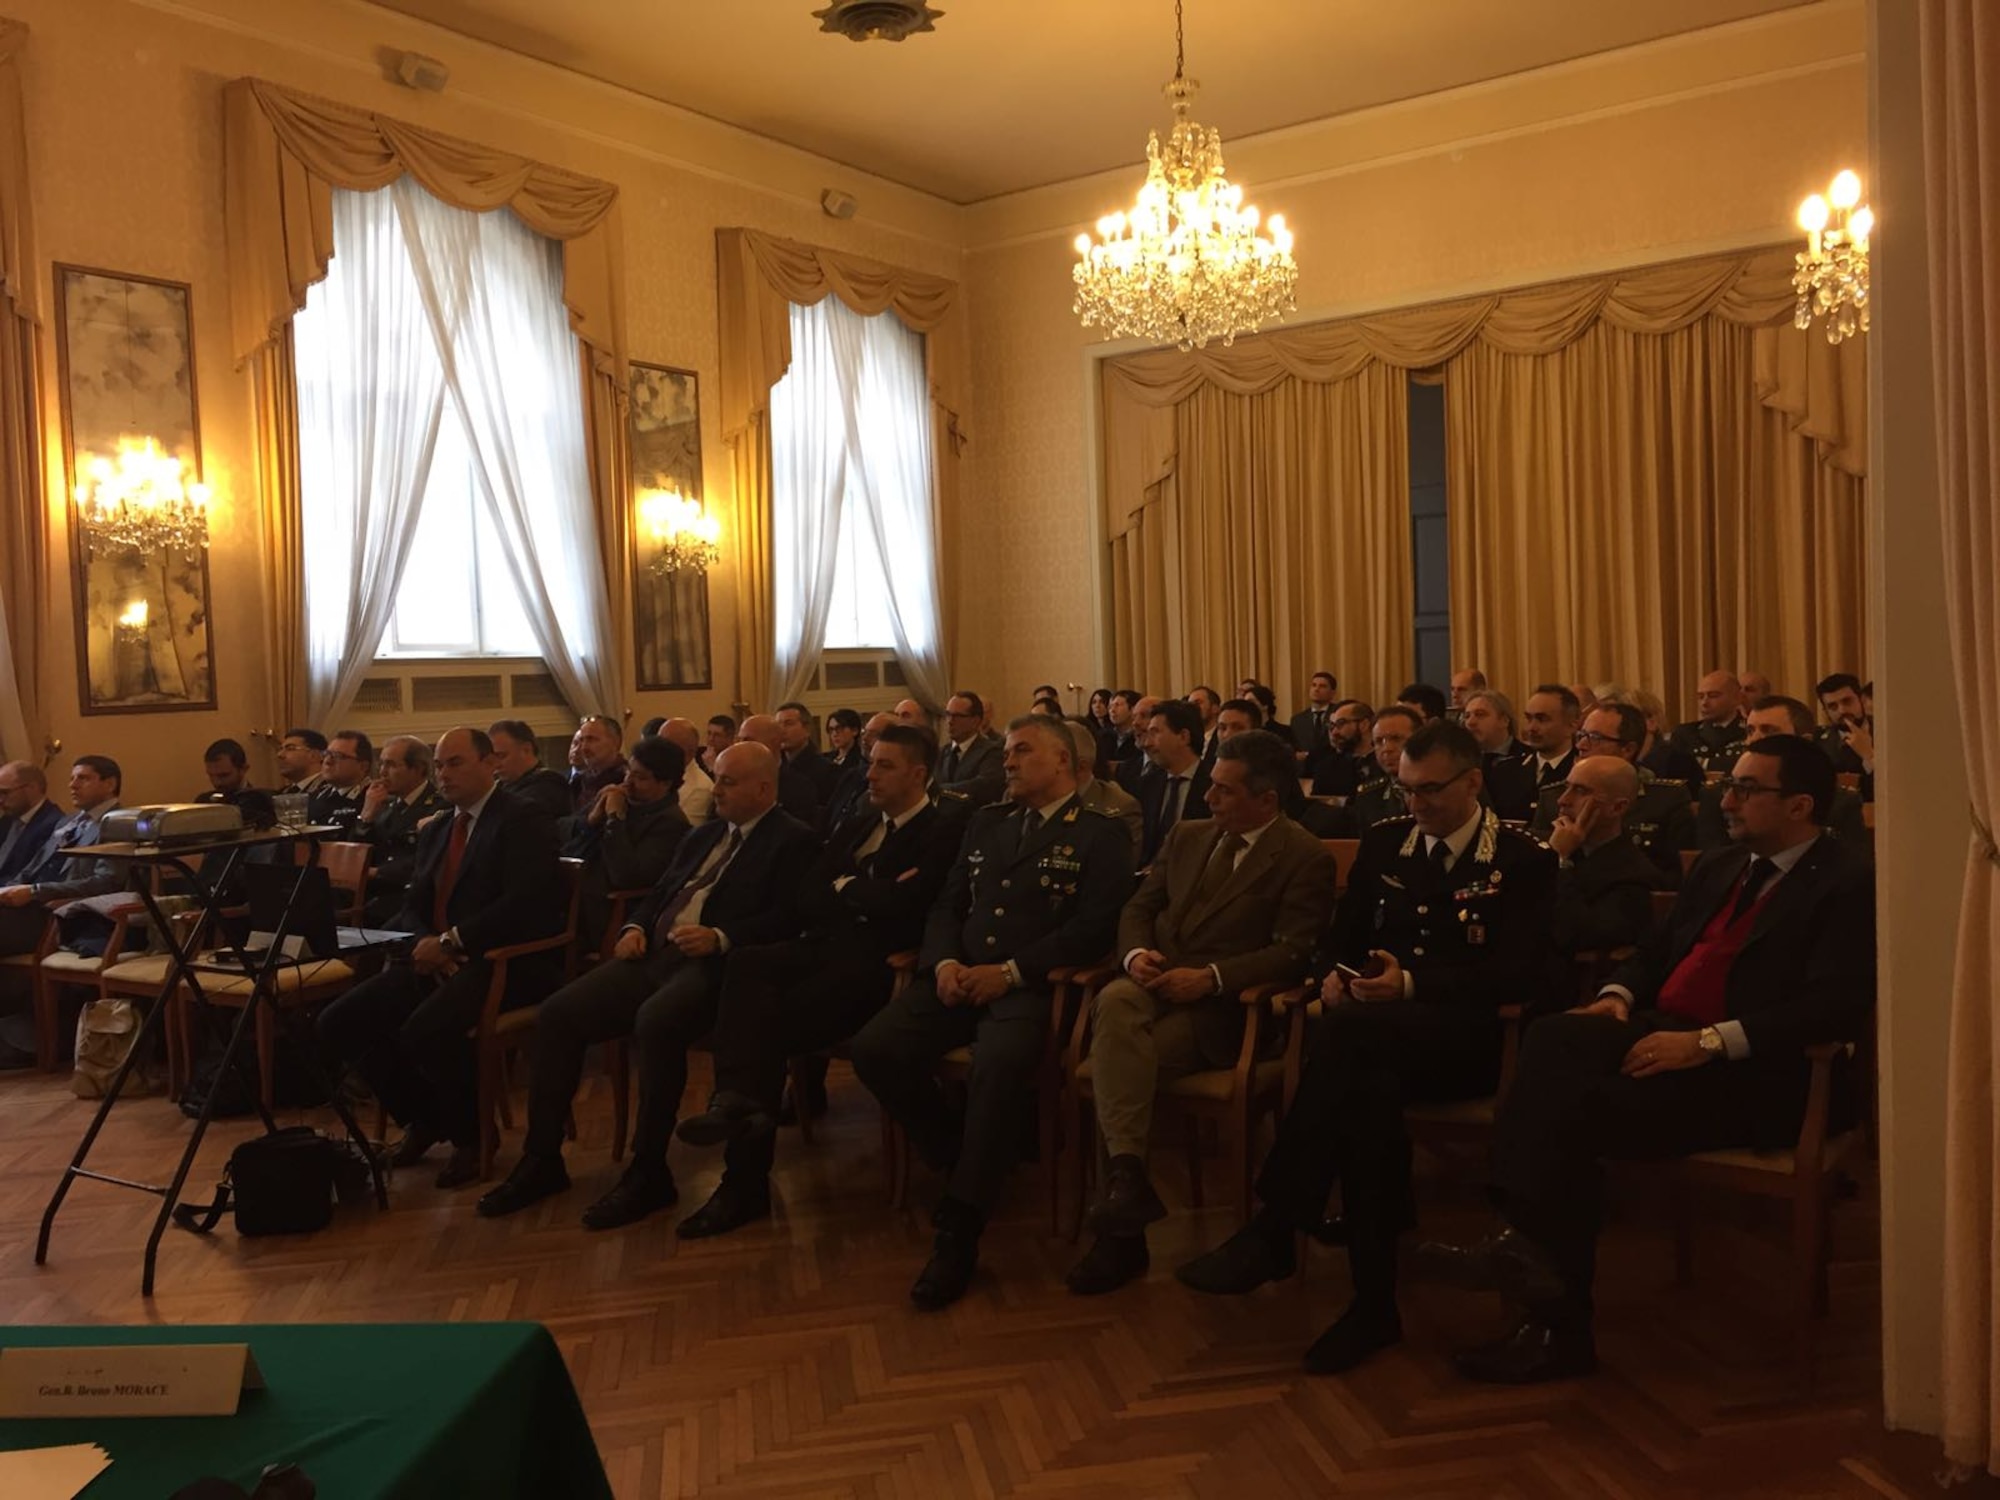 More than 90 attendees, representing nearly every law enforcement and military agency in northeastern Italy, listen Feb. 23 during the terrorism threat seminar in Trieste, hosted by Air Force Office of Special Investigations special agents from Detachments 535 and 531. (U.S. Air Force photo/AFOSI Det. 535)    